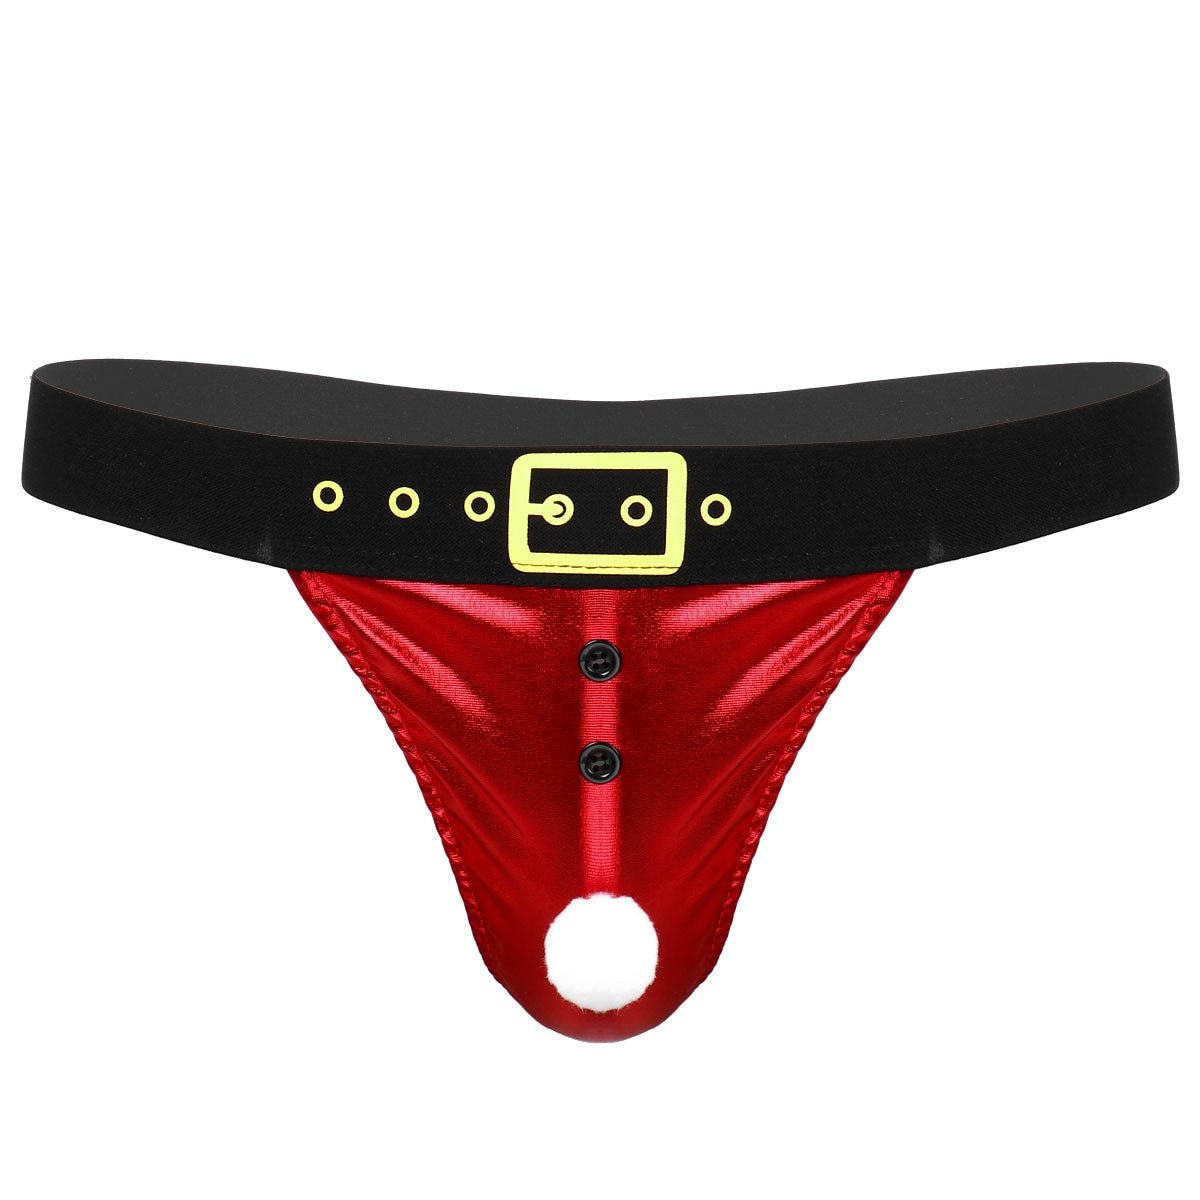 XMAS GIFT - Mens Christmas Santa Pouch Thong with Decoration Ball Red